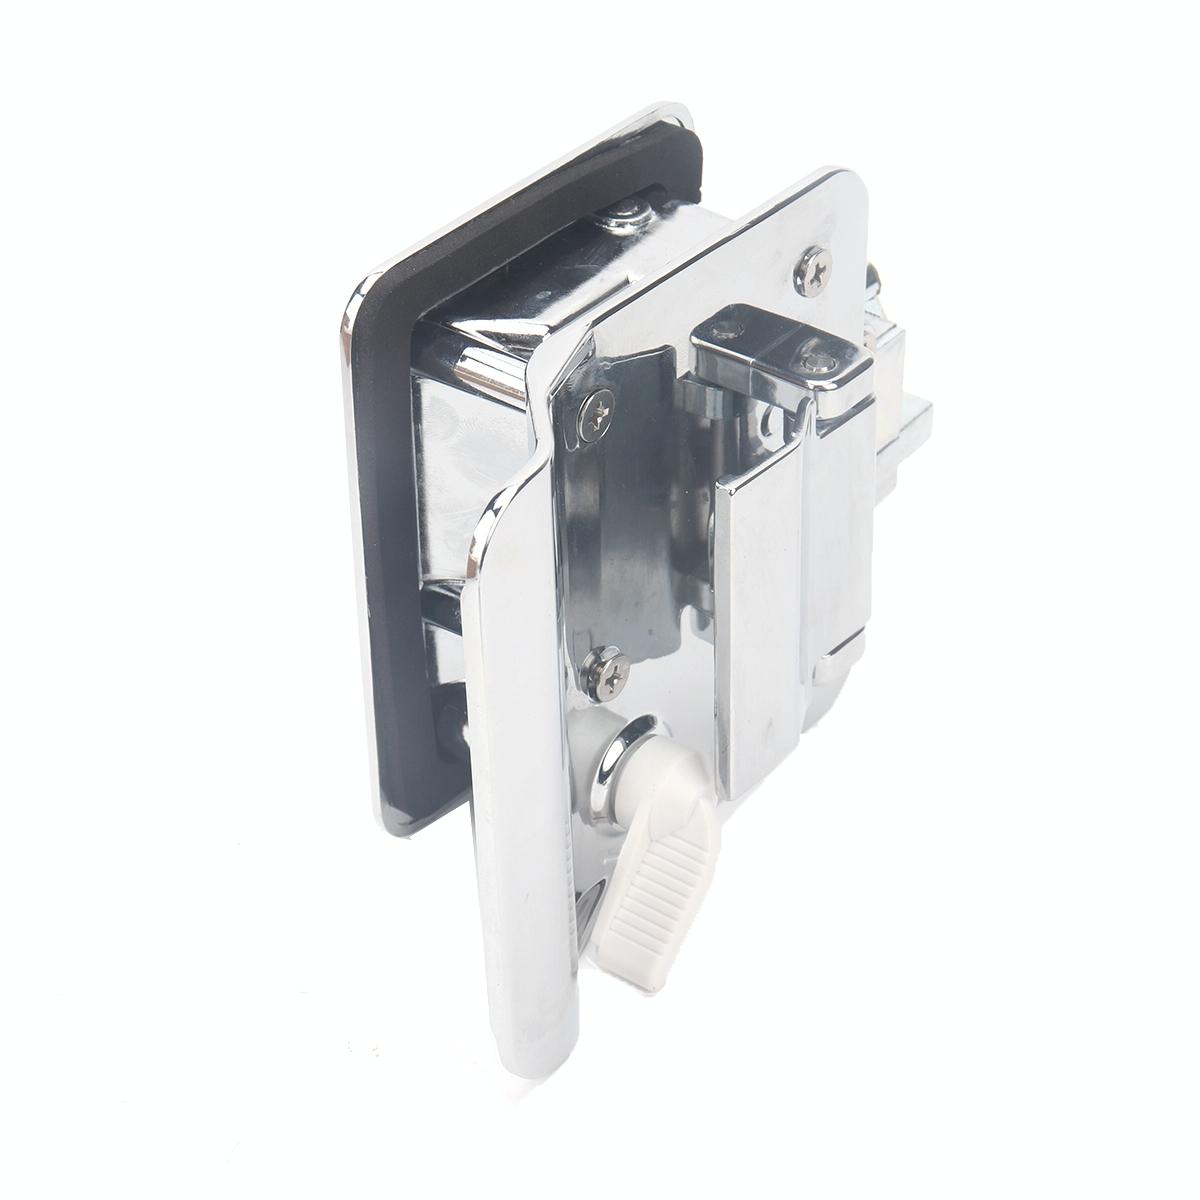 A5981-01 Chrome RV Paddle Entry Door Lock Latch